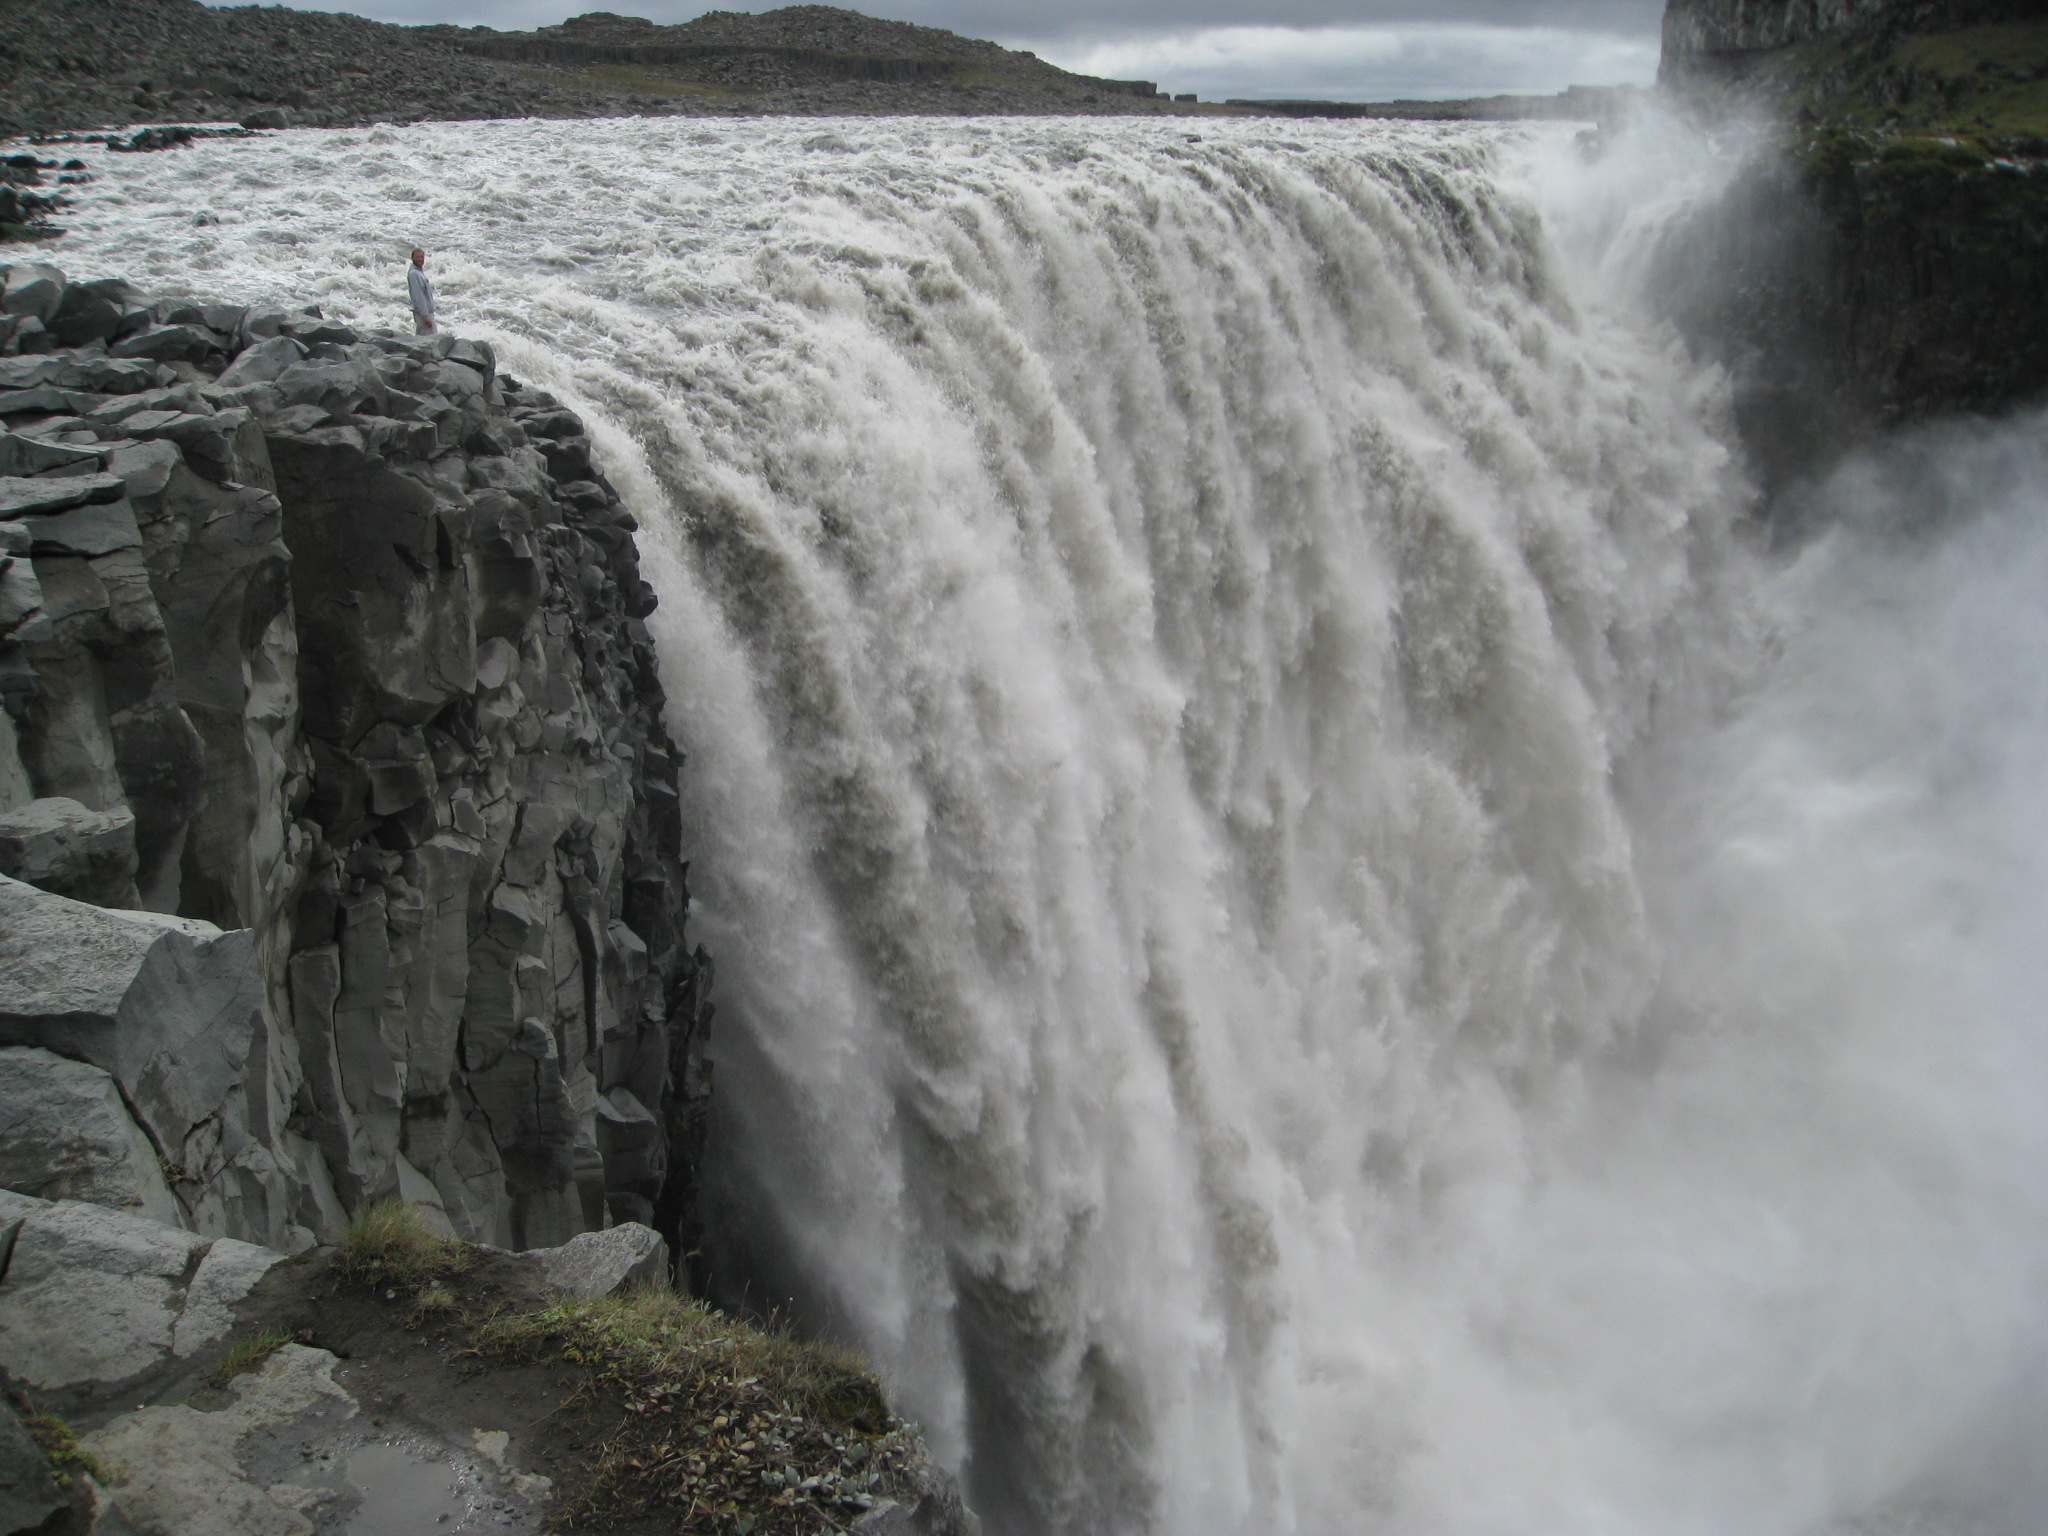 Dettifoss, the most powerful waterfall in Europe, is in Iceland